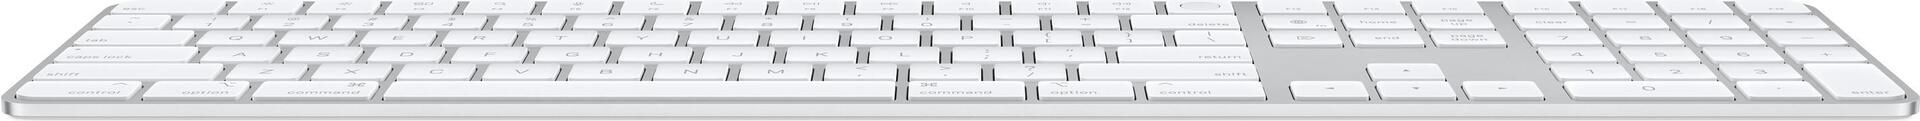 Image of Apple Magic Keyboard with Touch ID and Numeric Keypad - Tastatur - Bluetooth - QWERTY - Internationales Englisch - Silber - für iMac (Anfang 2021), Mac mini (Ende 2020), MacBook Air (Ende 2020), MacBook Pro (Ende 2020) (MK2C3Z/A)